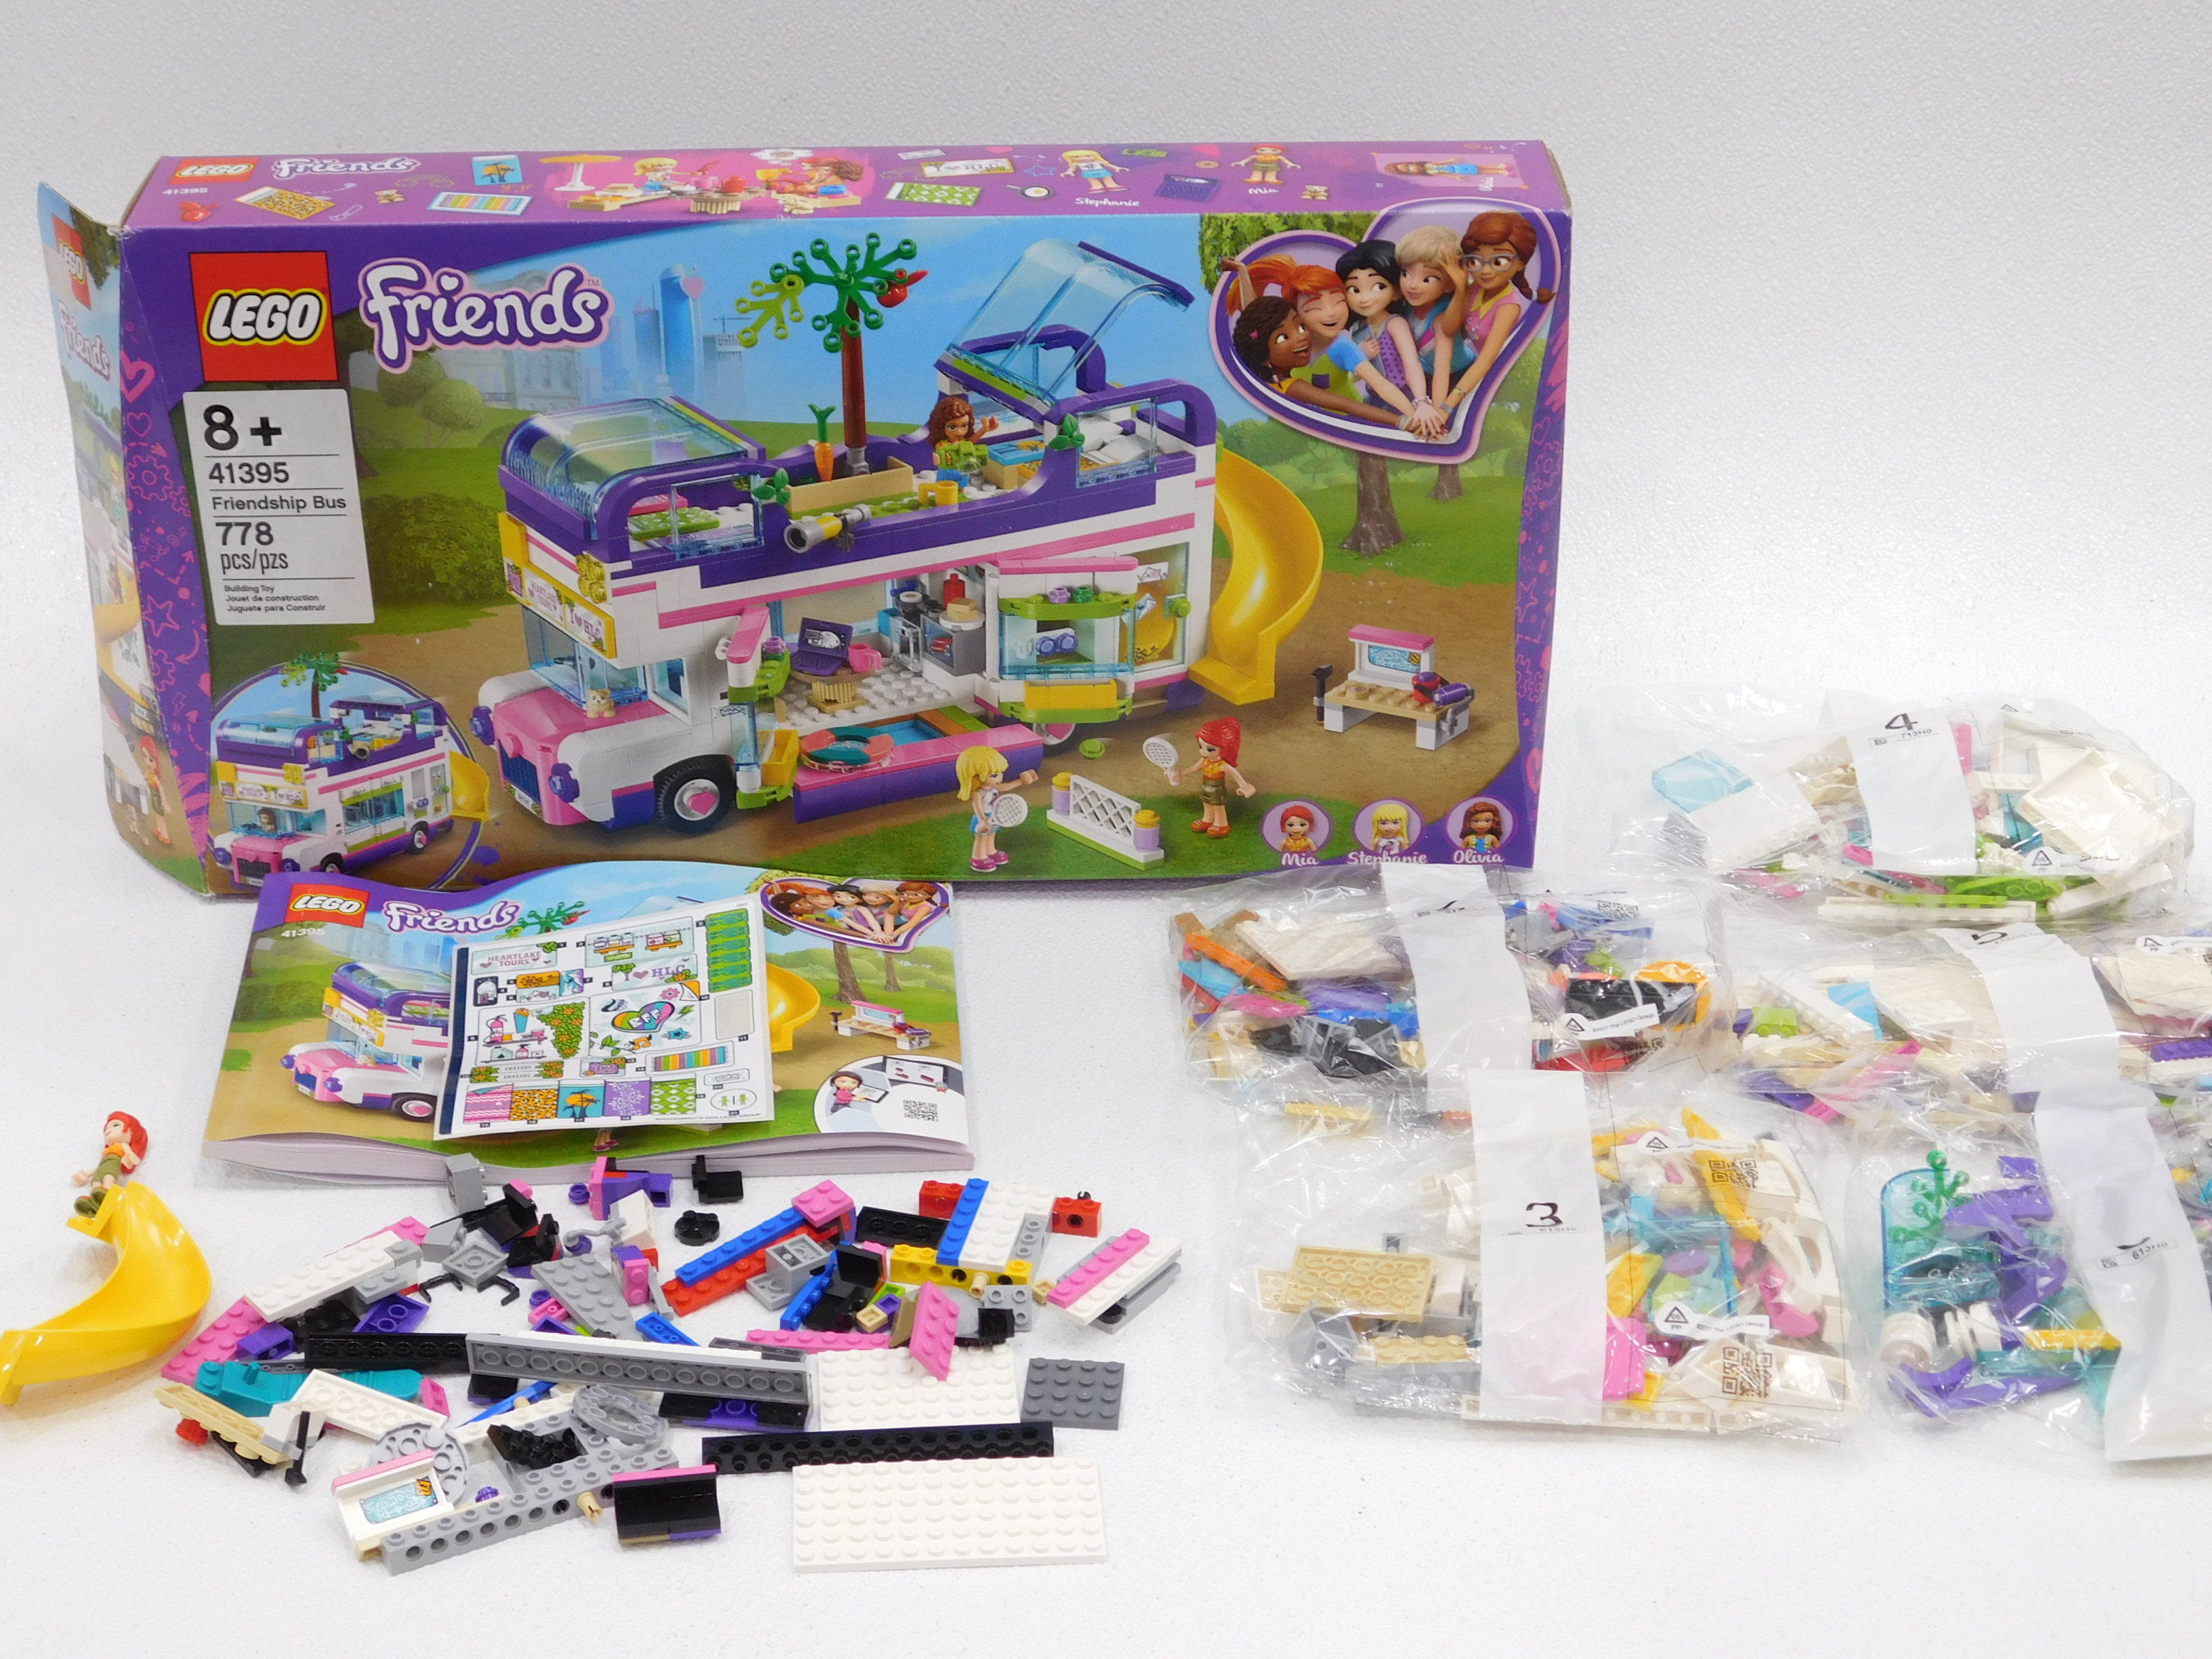 Drik vand Seminar kvælende Buy the Friends Set 41395: Friendship Bus w/ mostly sealed polybags |  GoodwillFinds